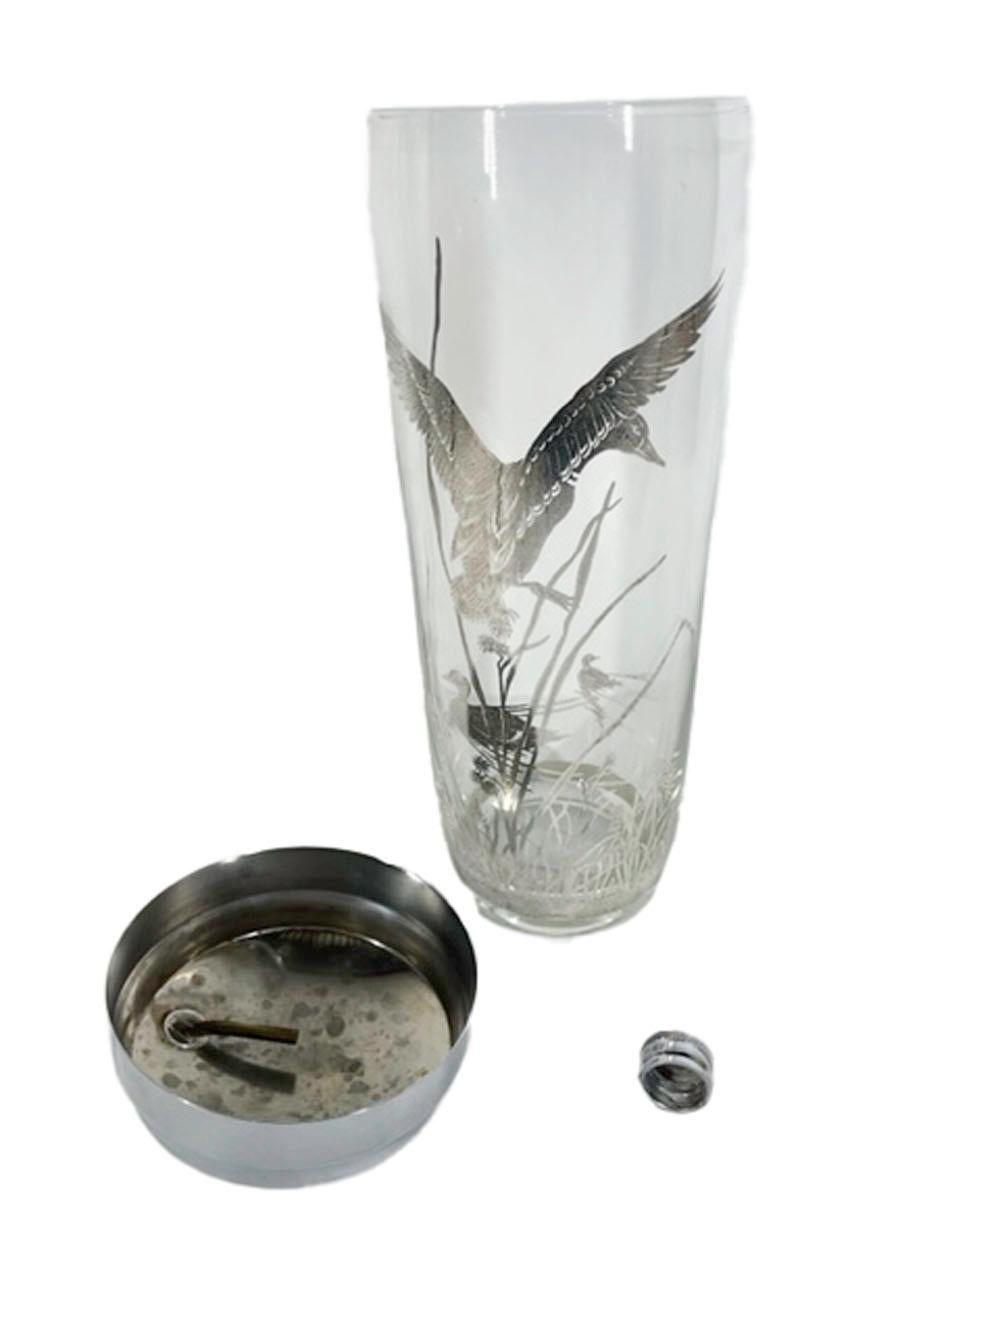 American Art Deco Cocktail Shaker with Silver Overlay Ducks in Reeds on Clear Glass